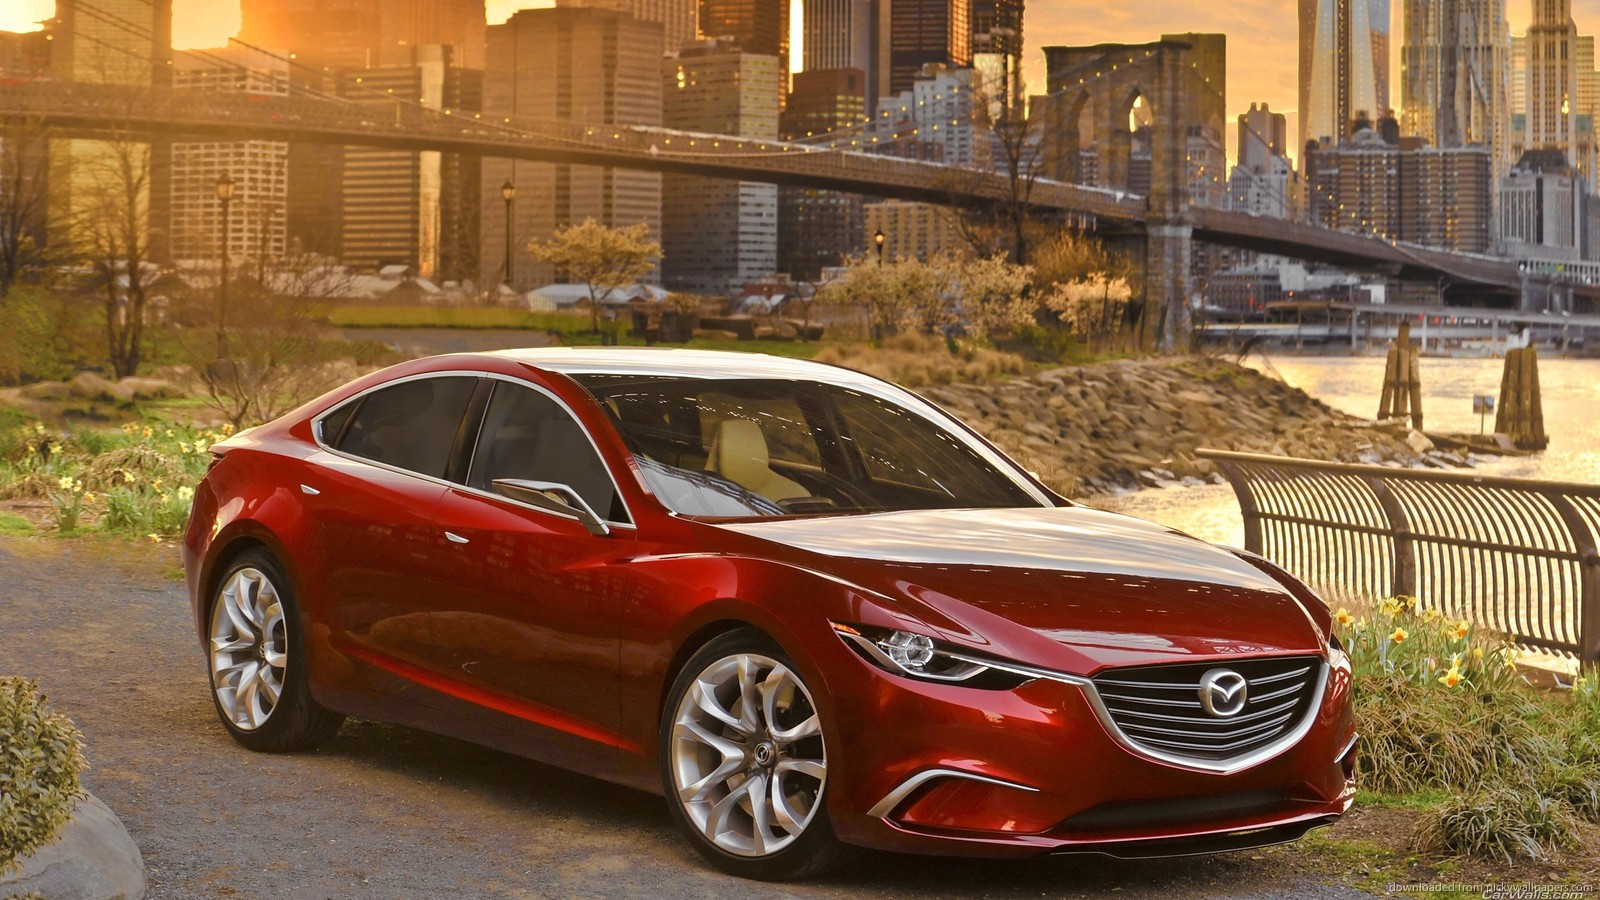 Awesome Mazda Wallpaper Full HD Pictures